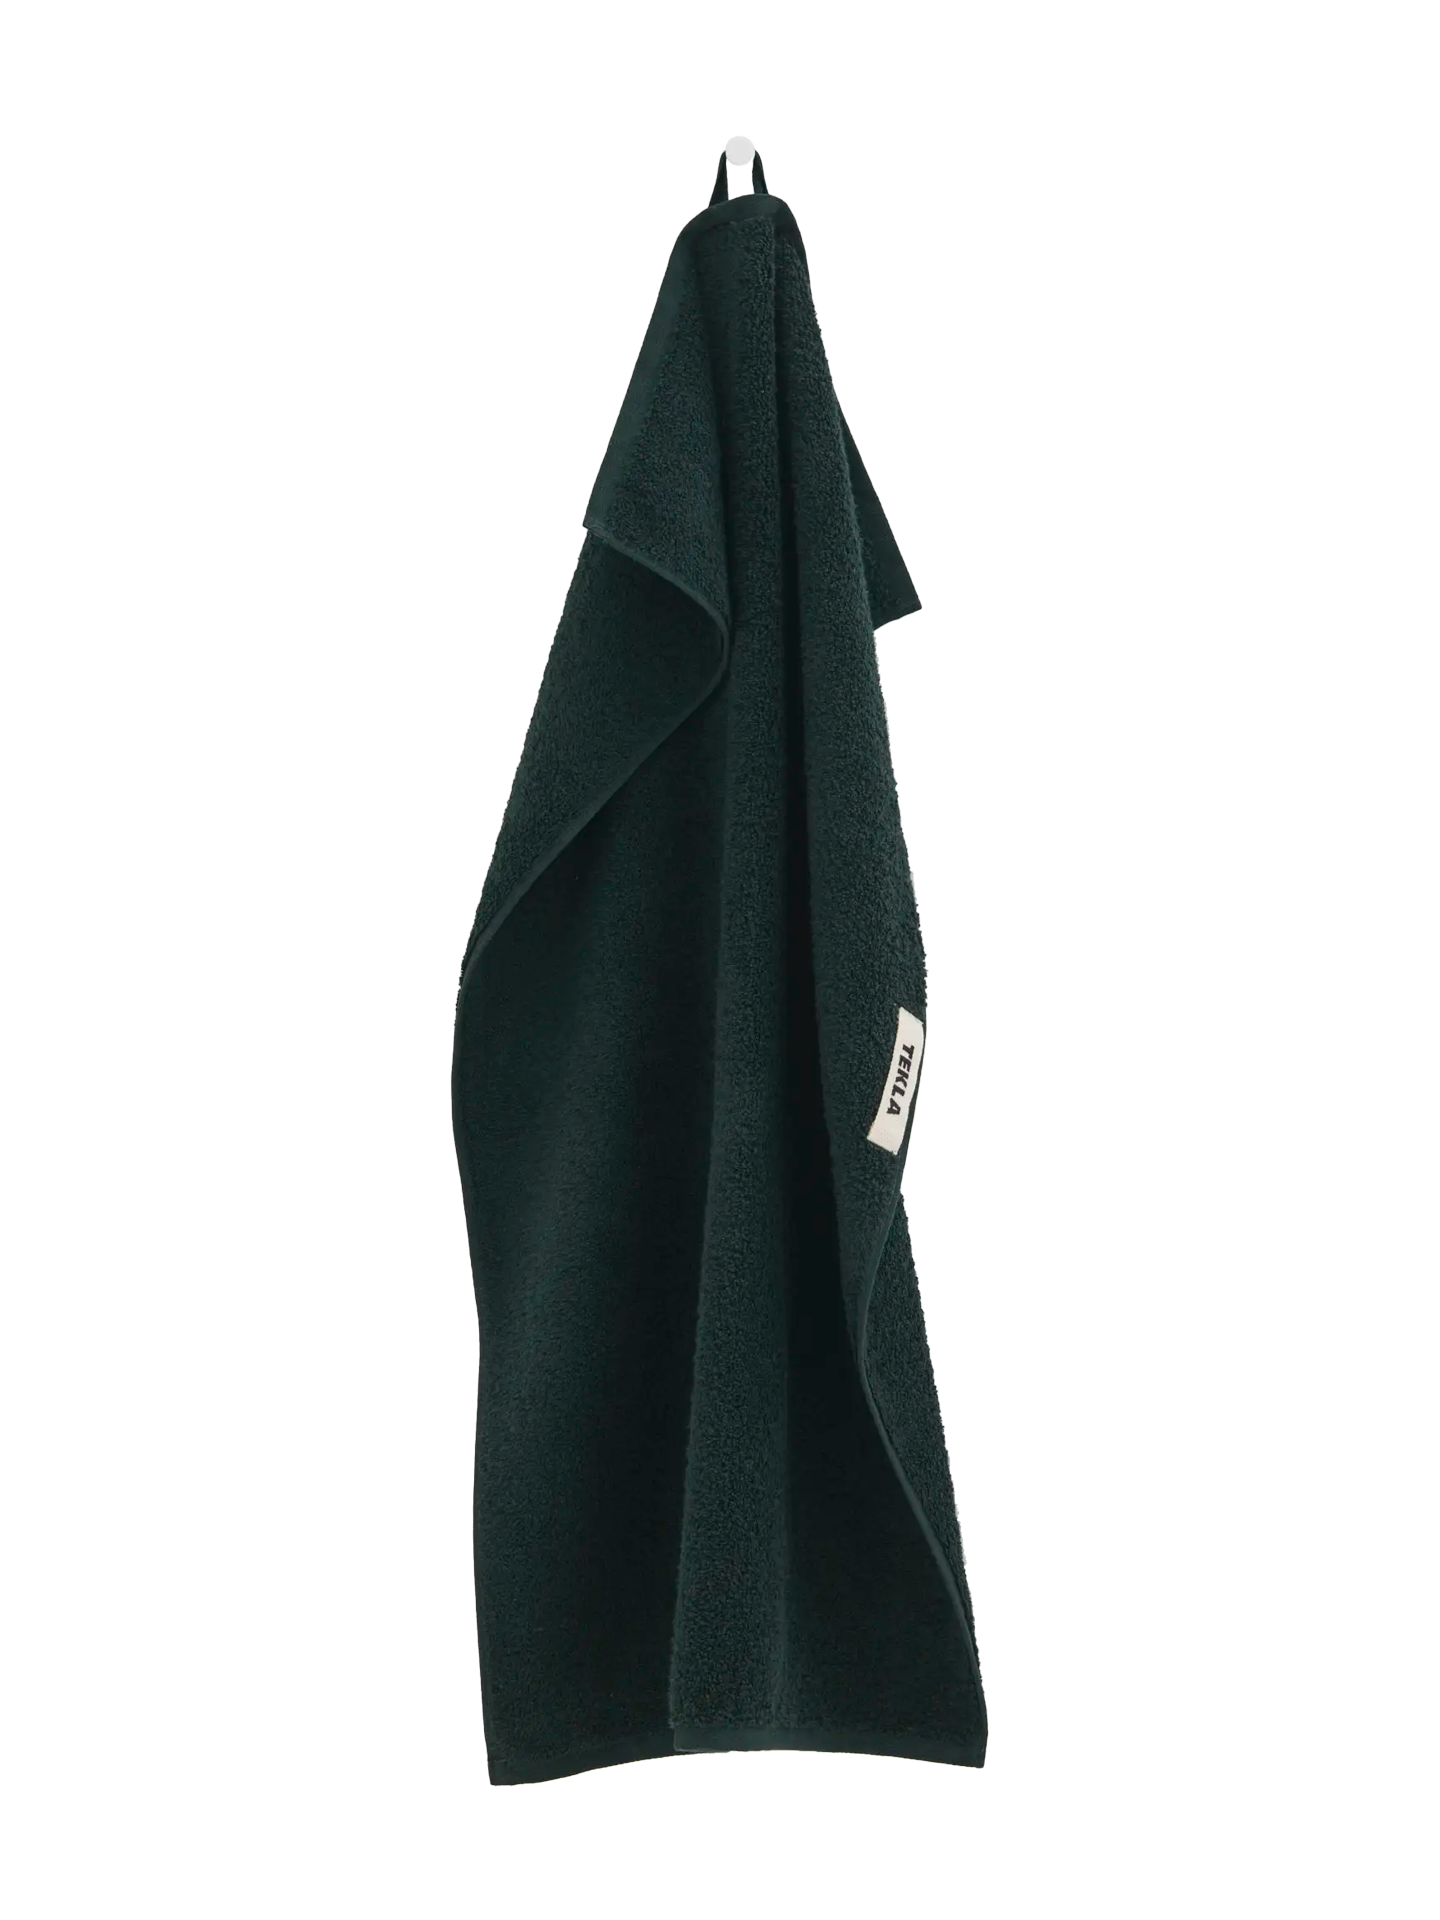 Terry Hand Towel, Solid forest green